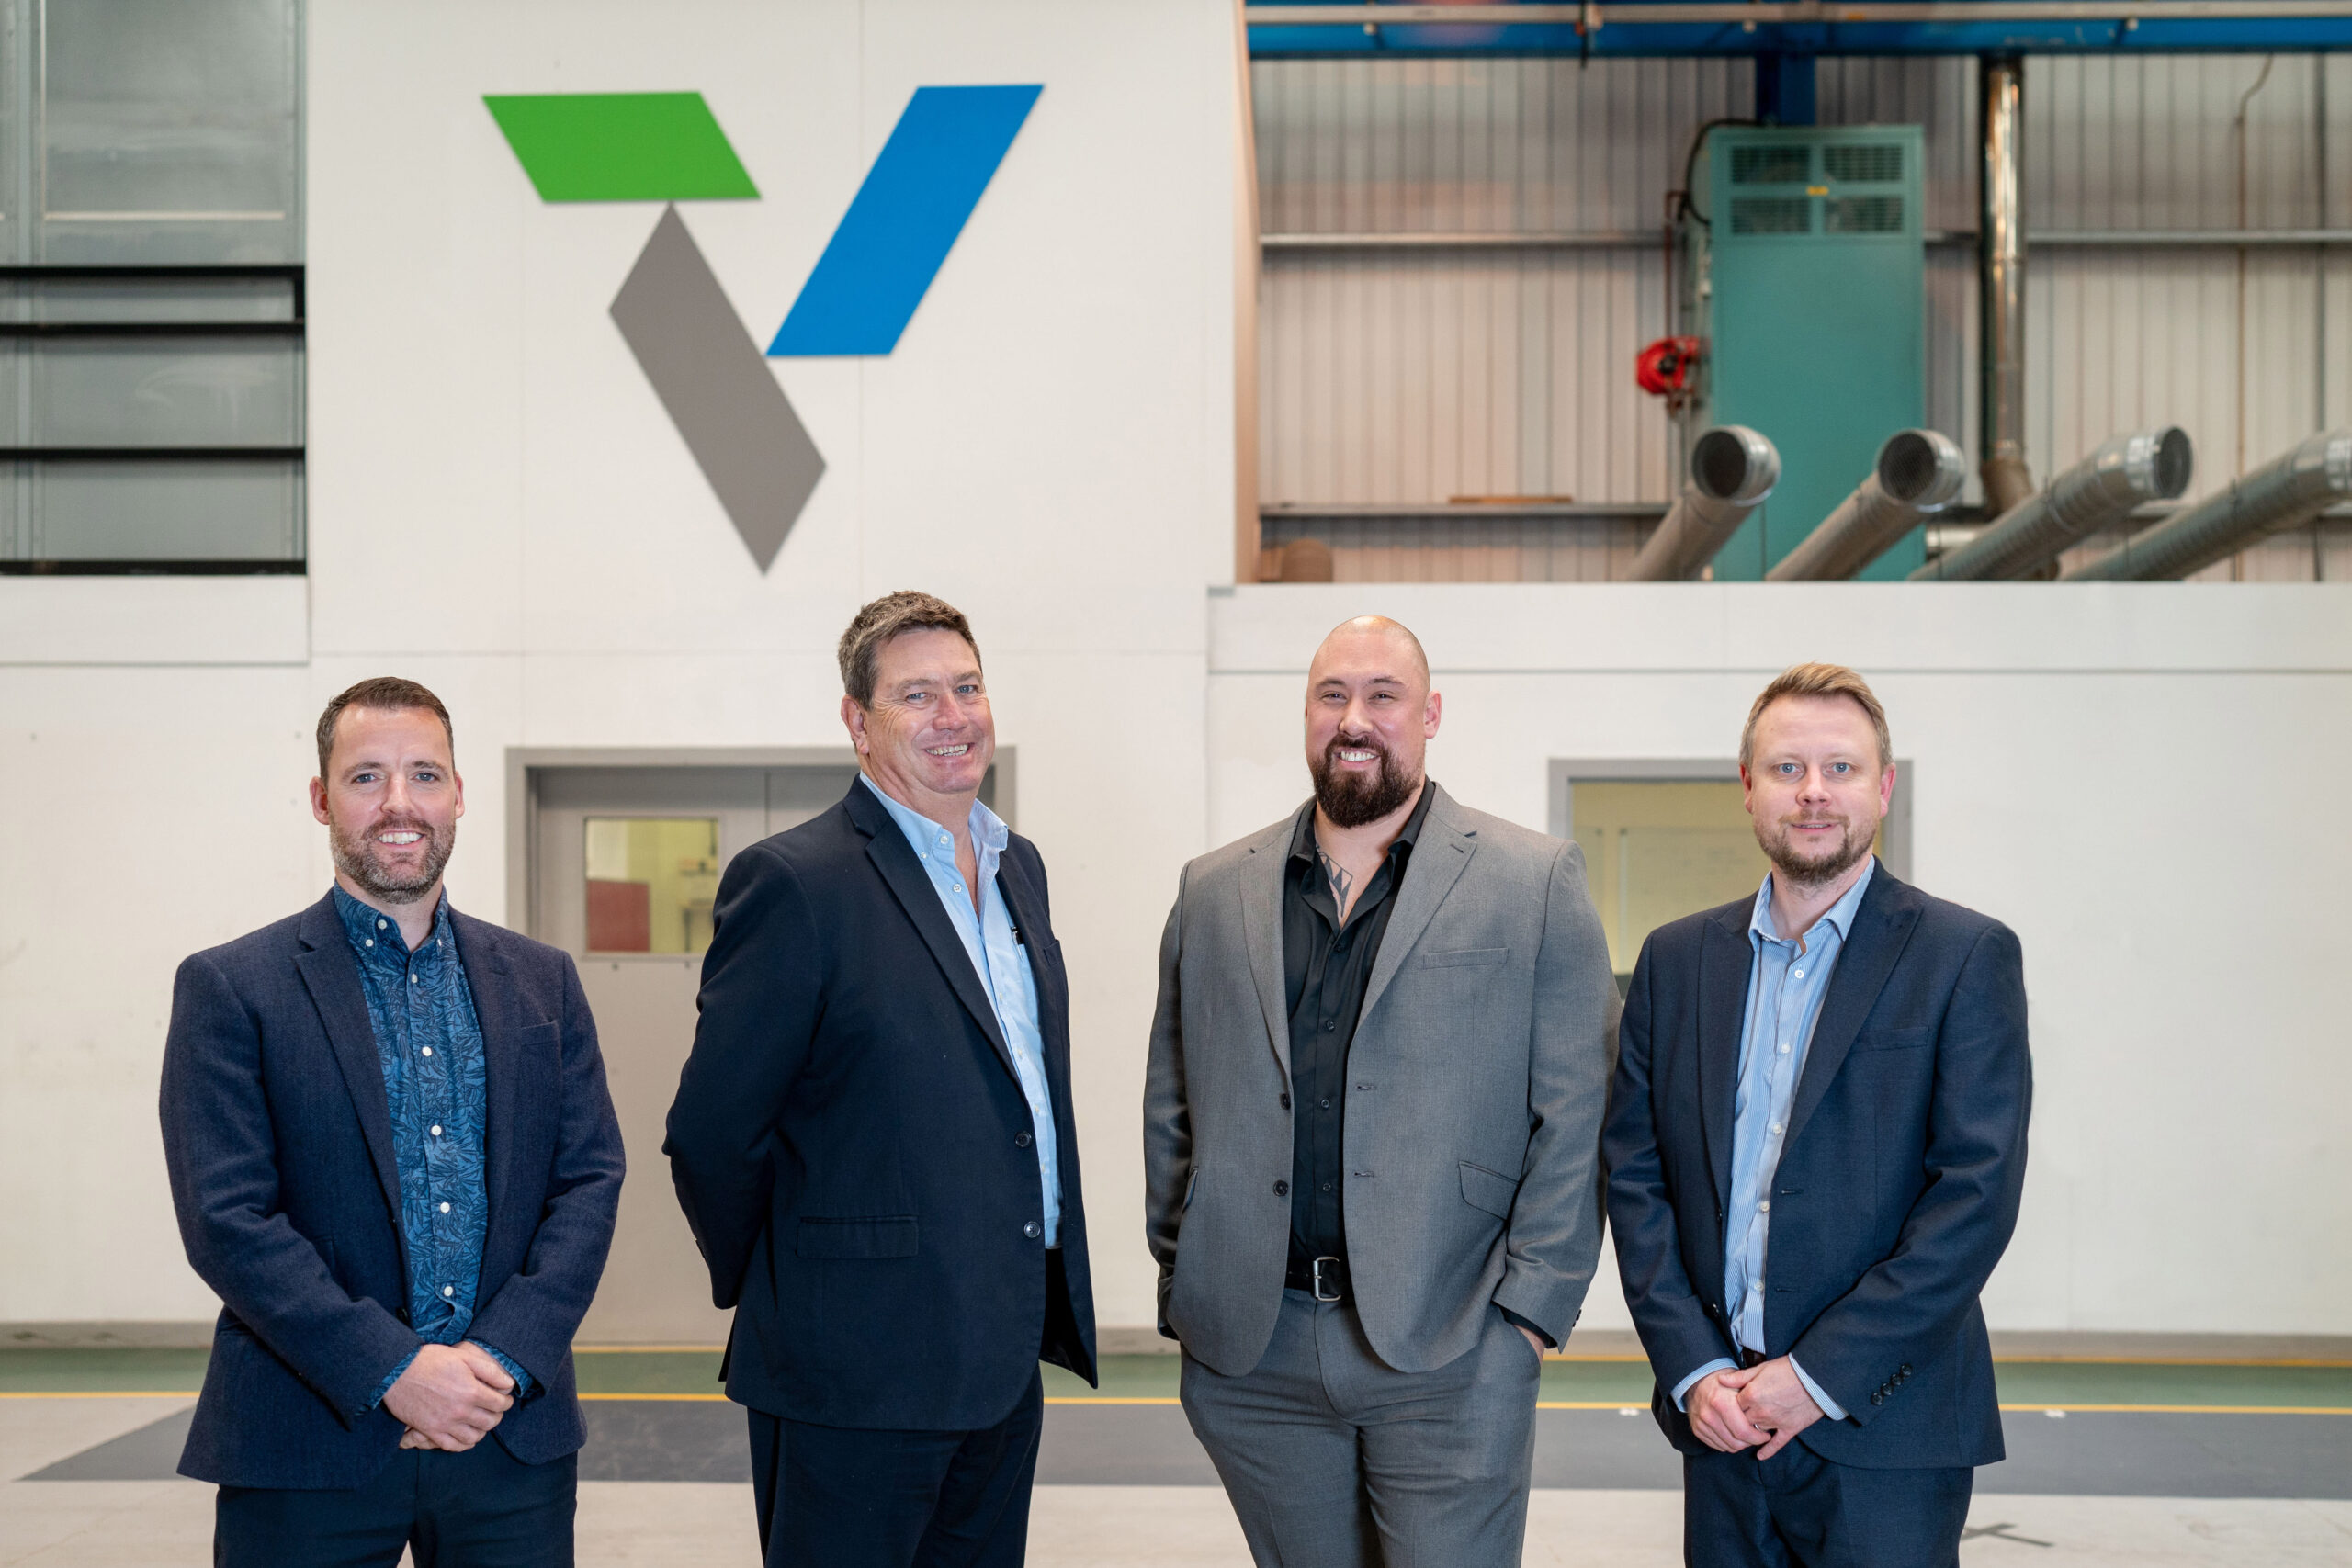 MEMBER NEWS: Verlume strengthens leadership team in preparation for growth at scale